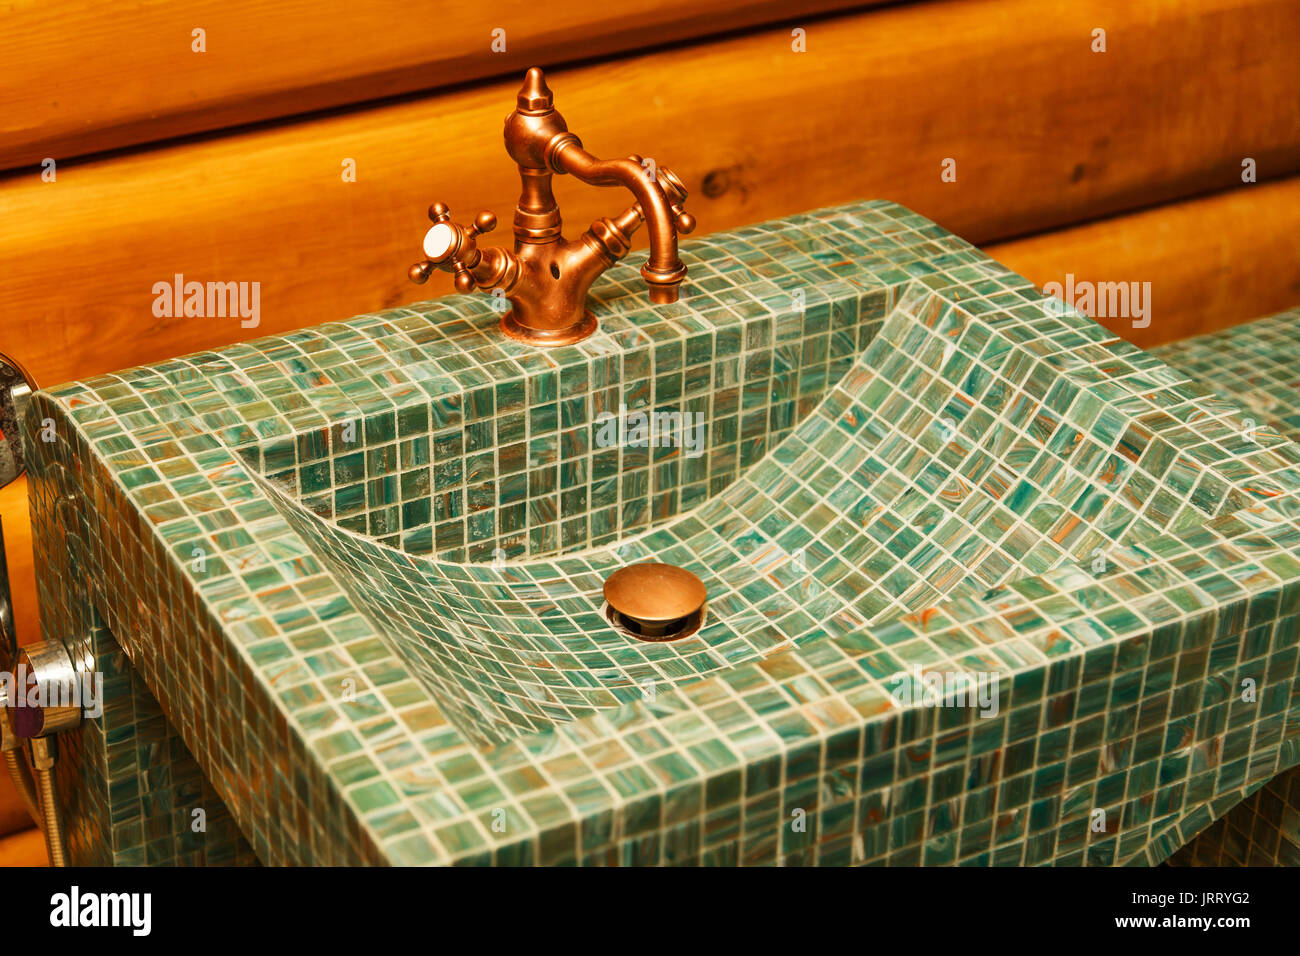 The copper faucet on an wash basin made of green mosaic tile. Stock Photo